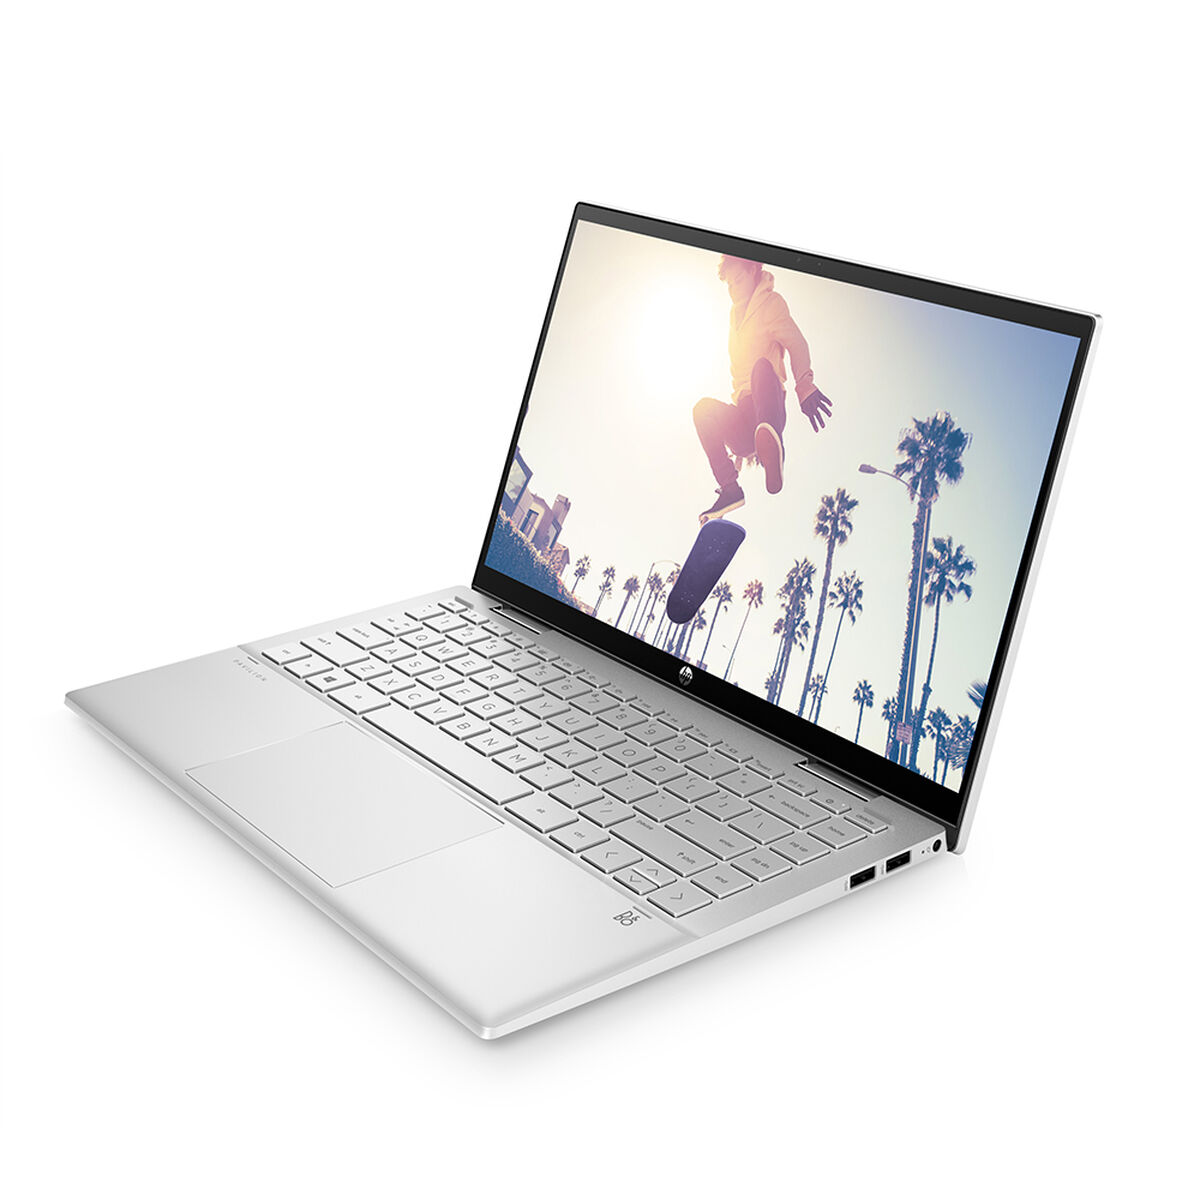 Notebook HP 14-dy0501 Core i3-1125G4 8GB 256GB SSD 14" Touch